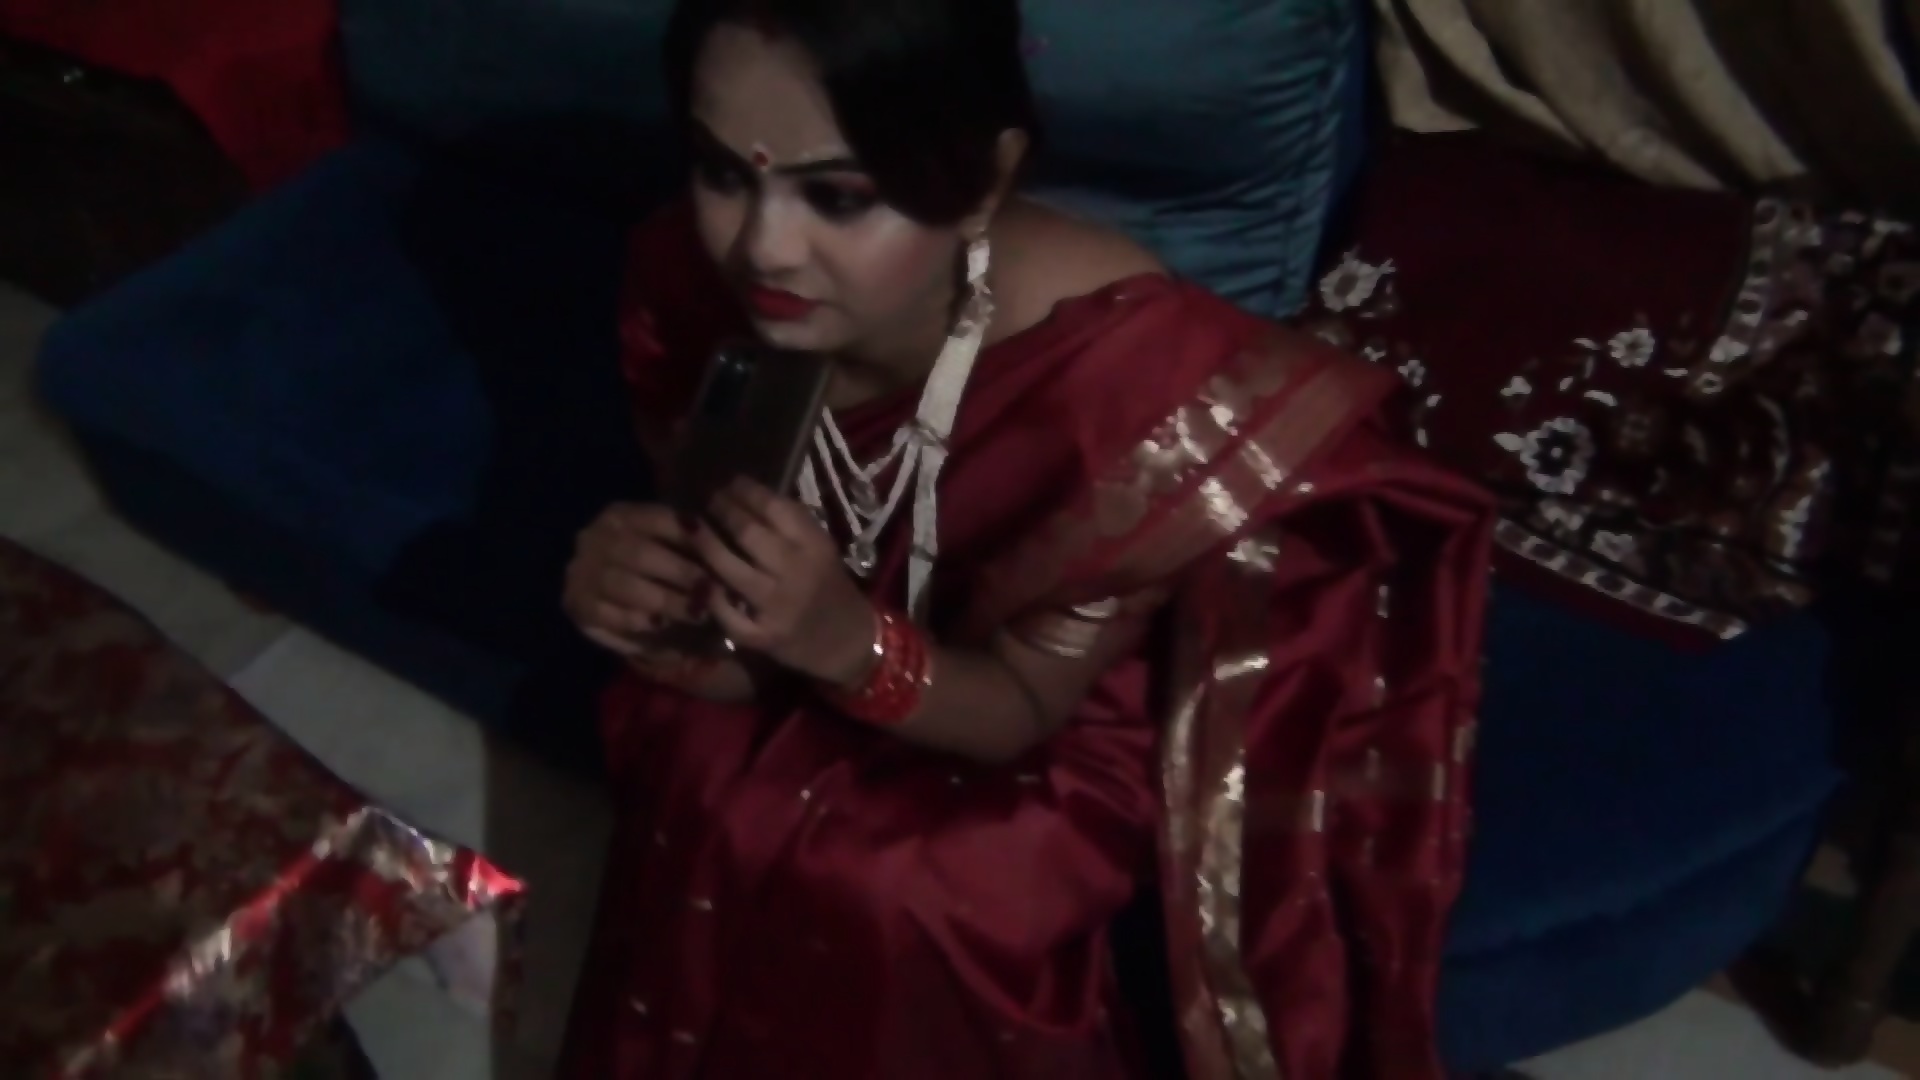 First Night Sex By Uncle And Aunty Is Hot Couple